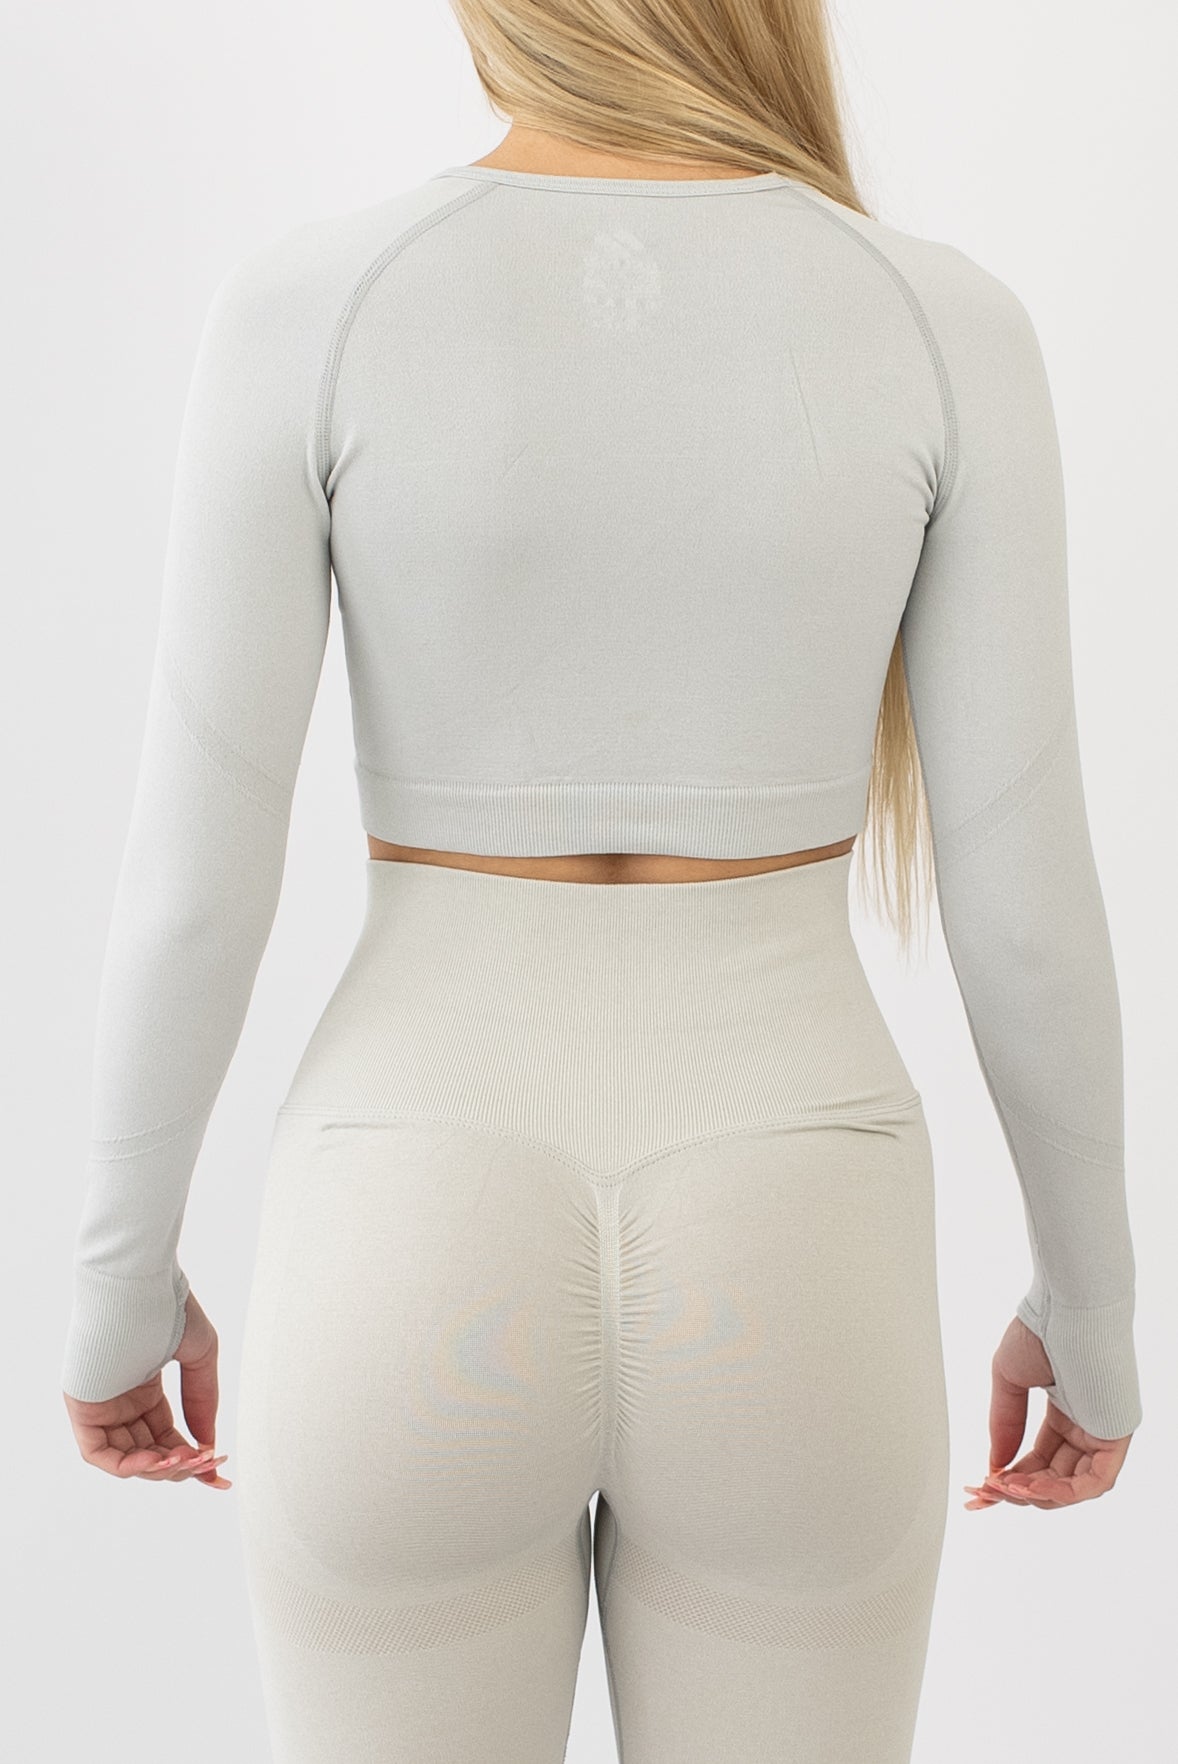 MAXXIM Womens Long Sleeve Seamless Cobra Crop Top with Thumb Holes for Gym  Workouts, Yoga, Running 